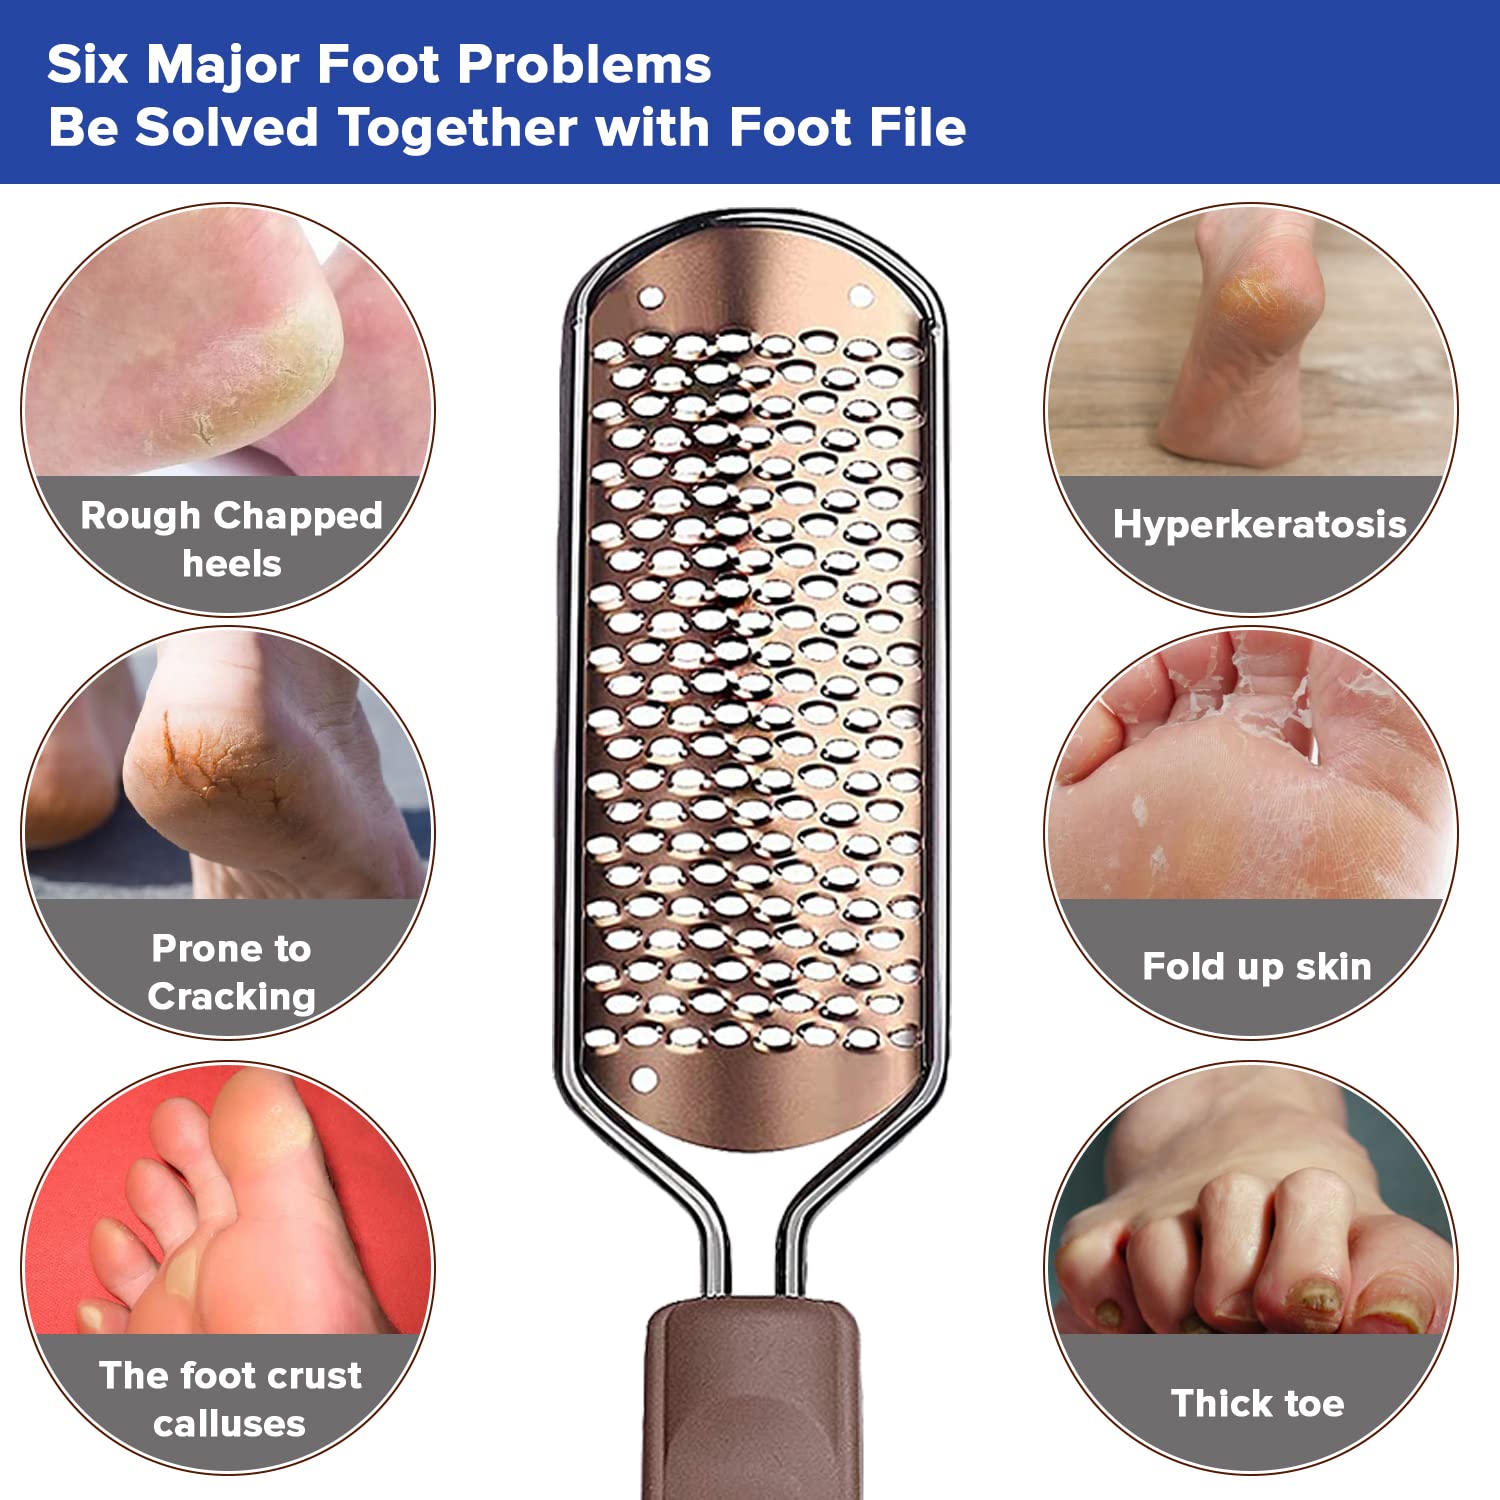 Dr Foot Callus Remover Gel Helps to Remove Calluses and Corns - 100ml & Dr Foot Foot File Callus Remover | For Dead skin, Calluses, Cracked Heels & Hard Skin Remover - With Free Brush